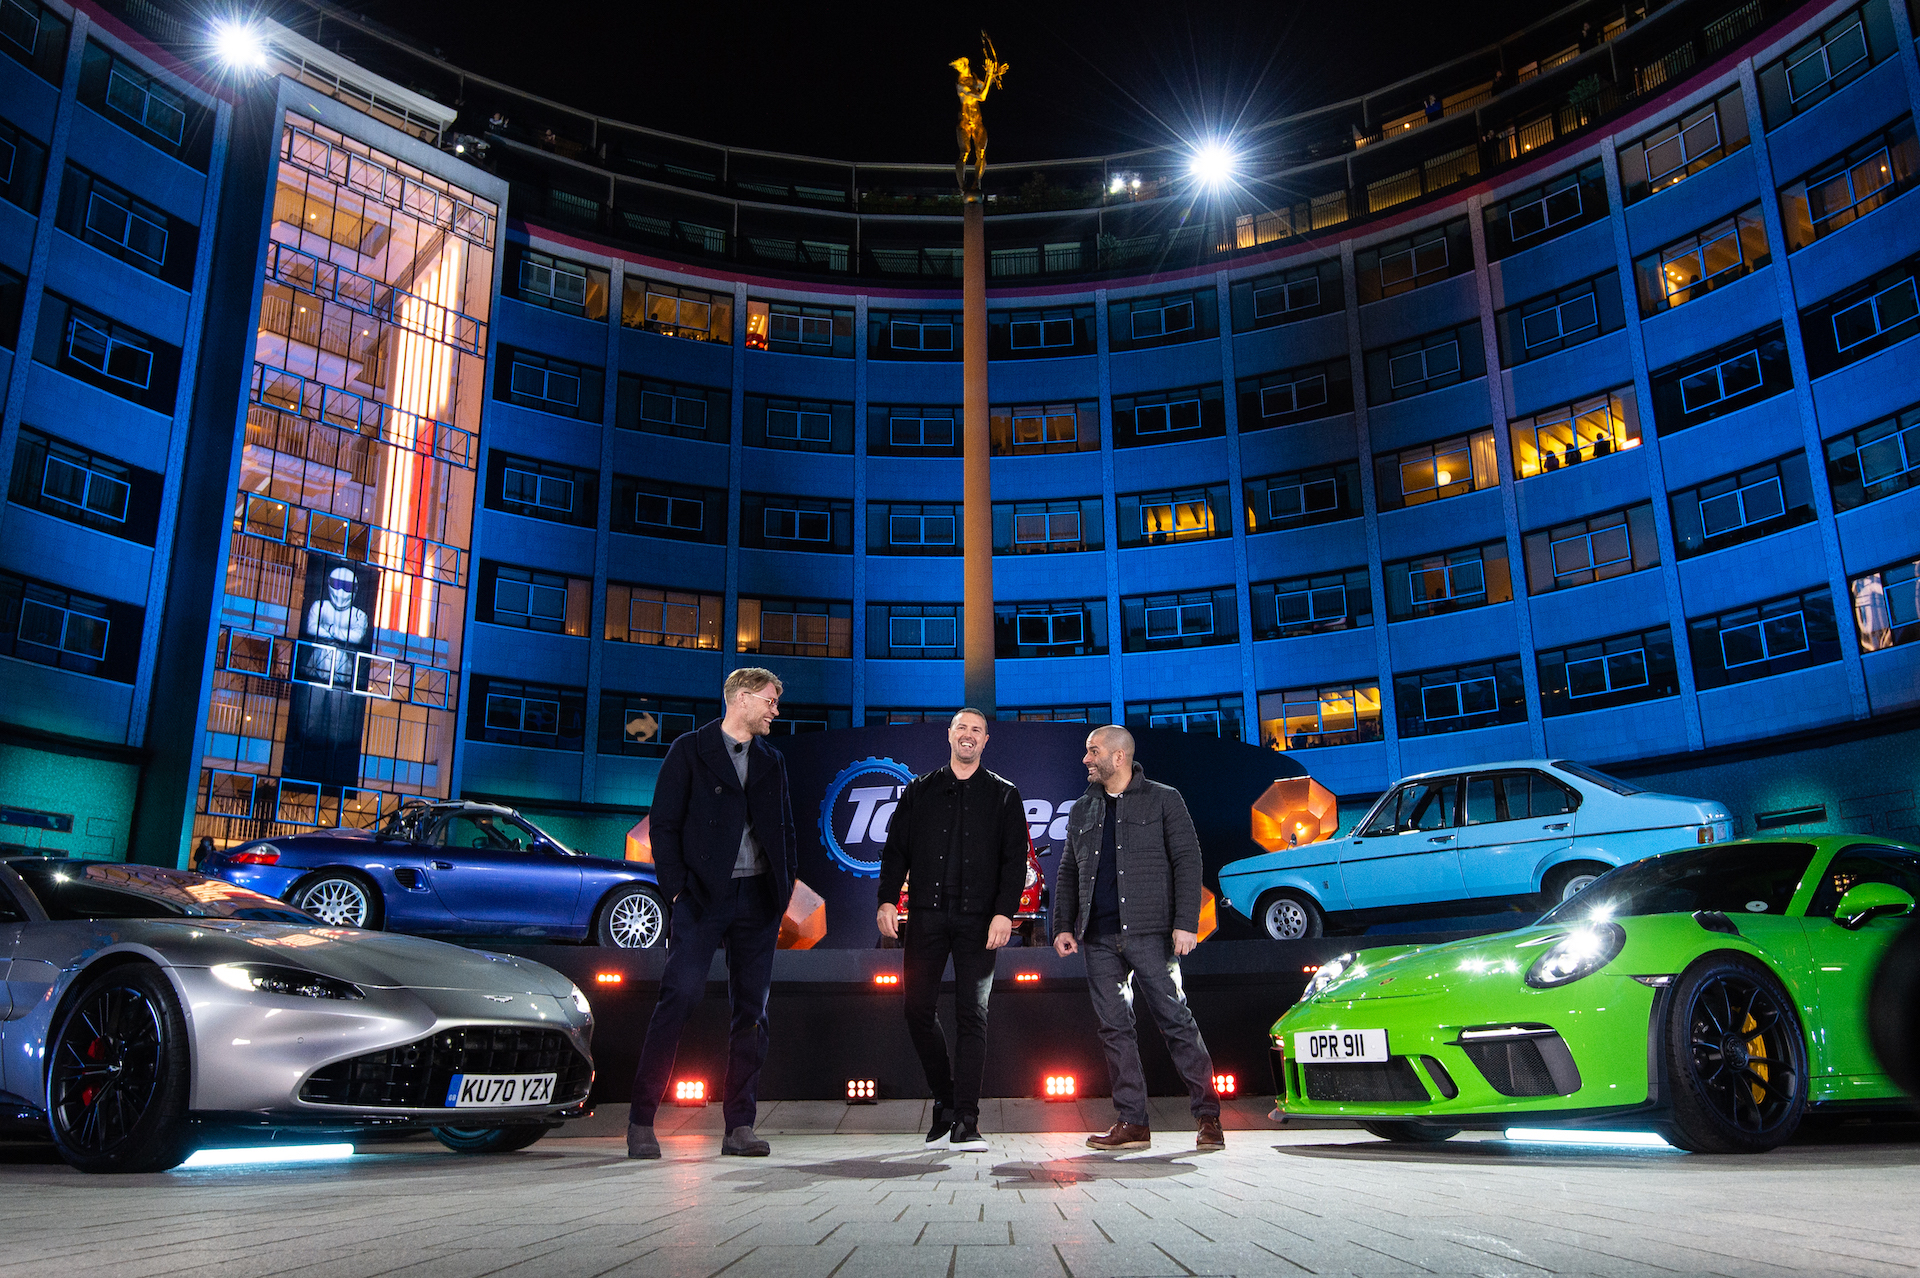 Top Gear films at Television Centre